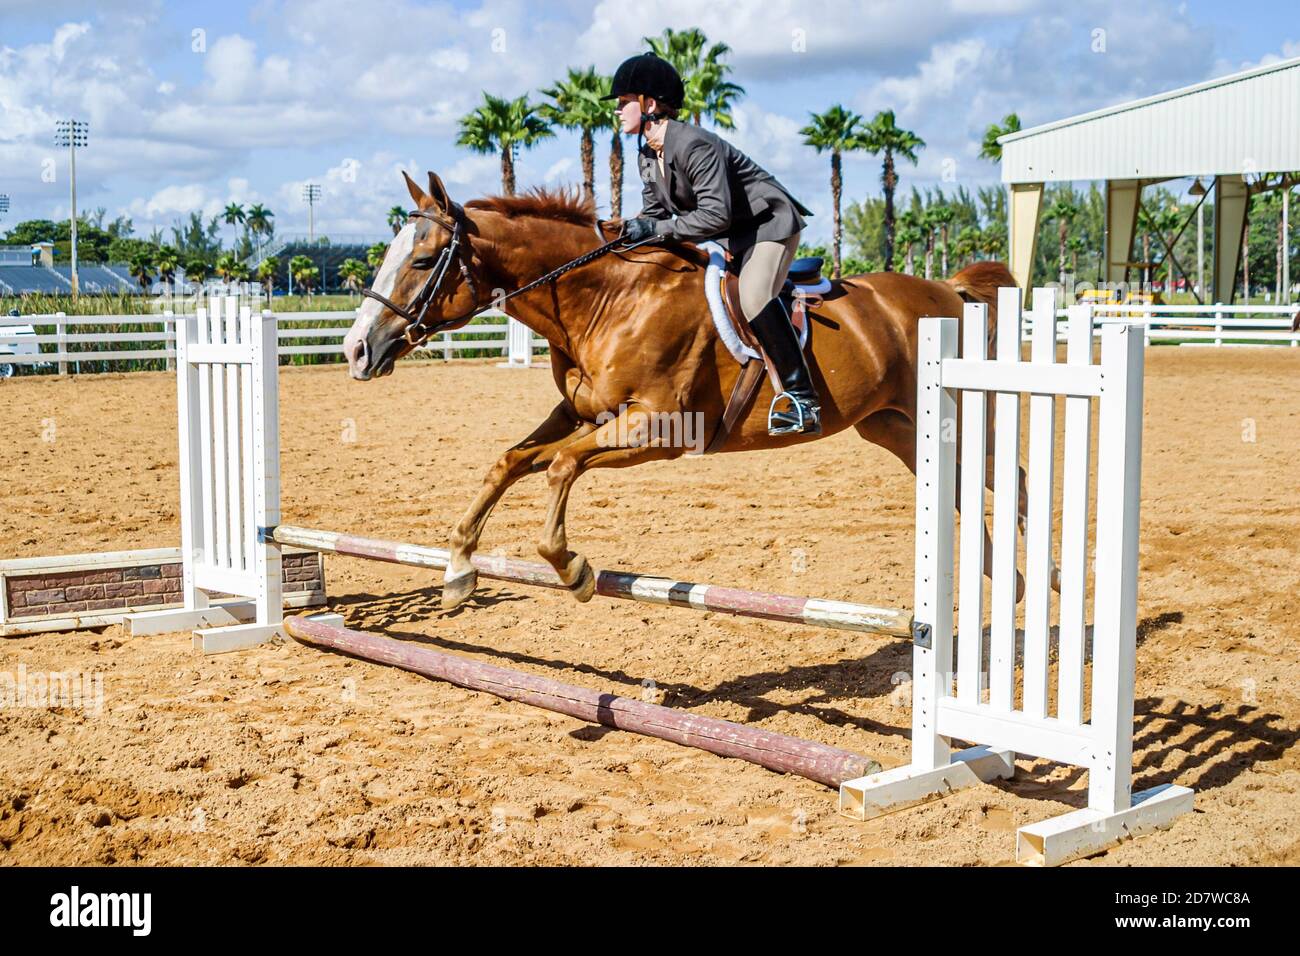 Miami Florida,Tropical Park,Heritage Horse Show,woman female rider riding competing performing jumping, Stock Photo